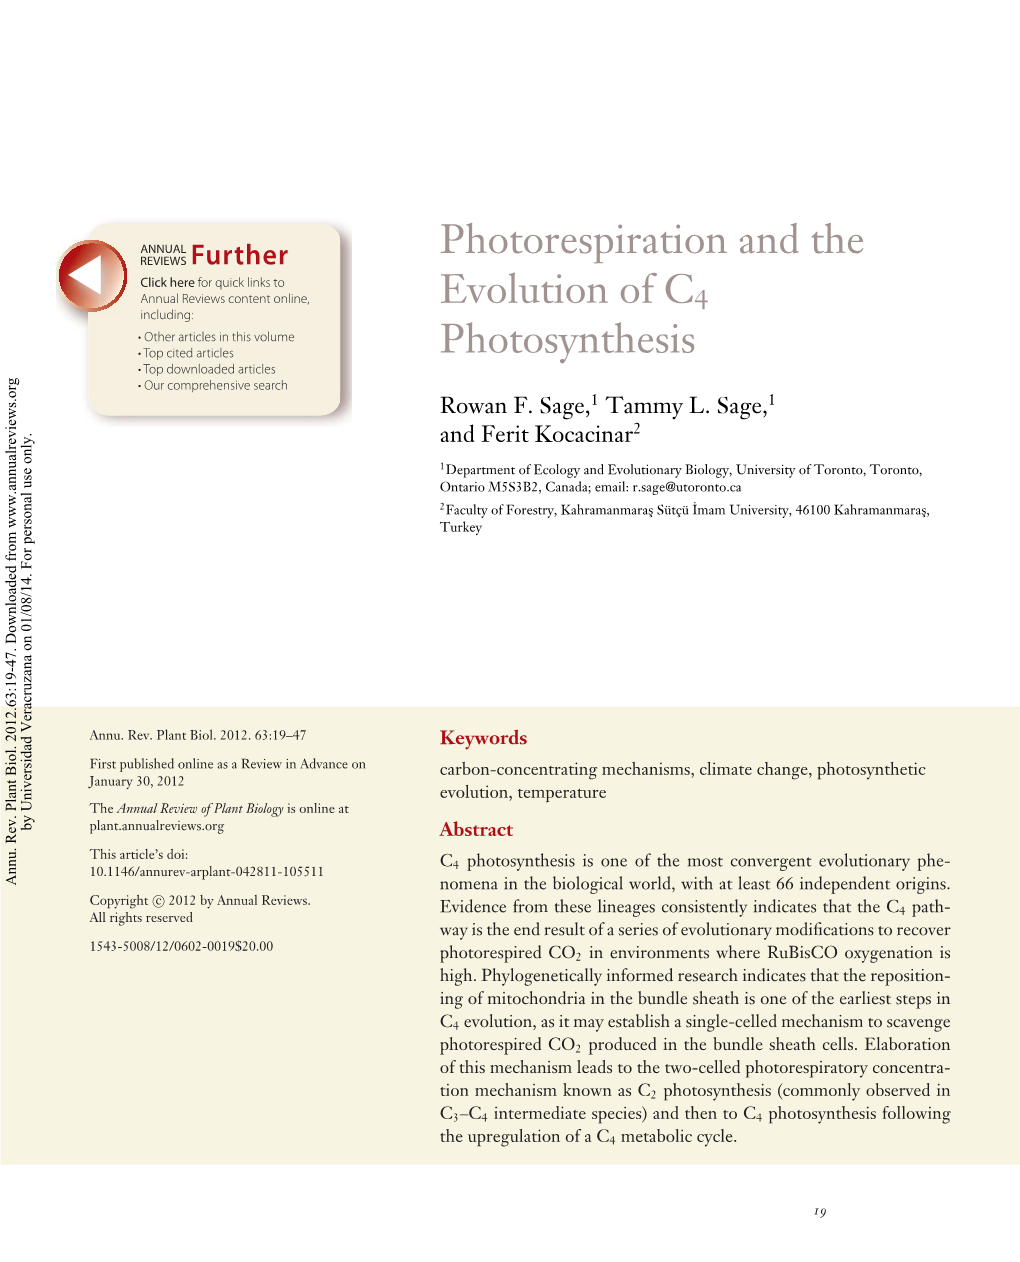 Photorespiration and the Evolution of C4 Photosynthesis